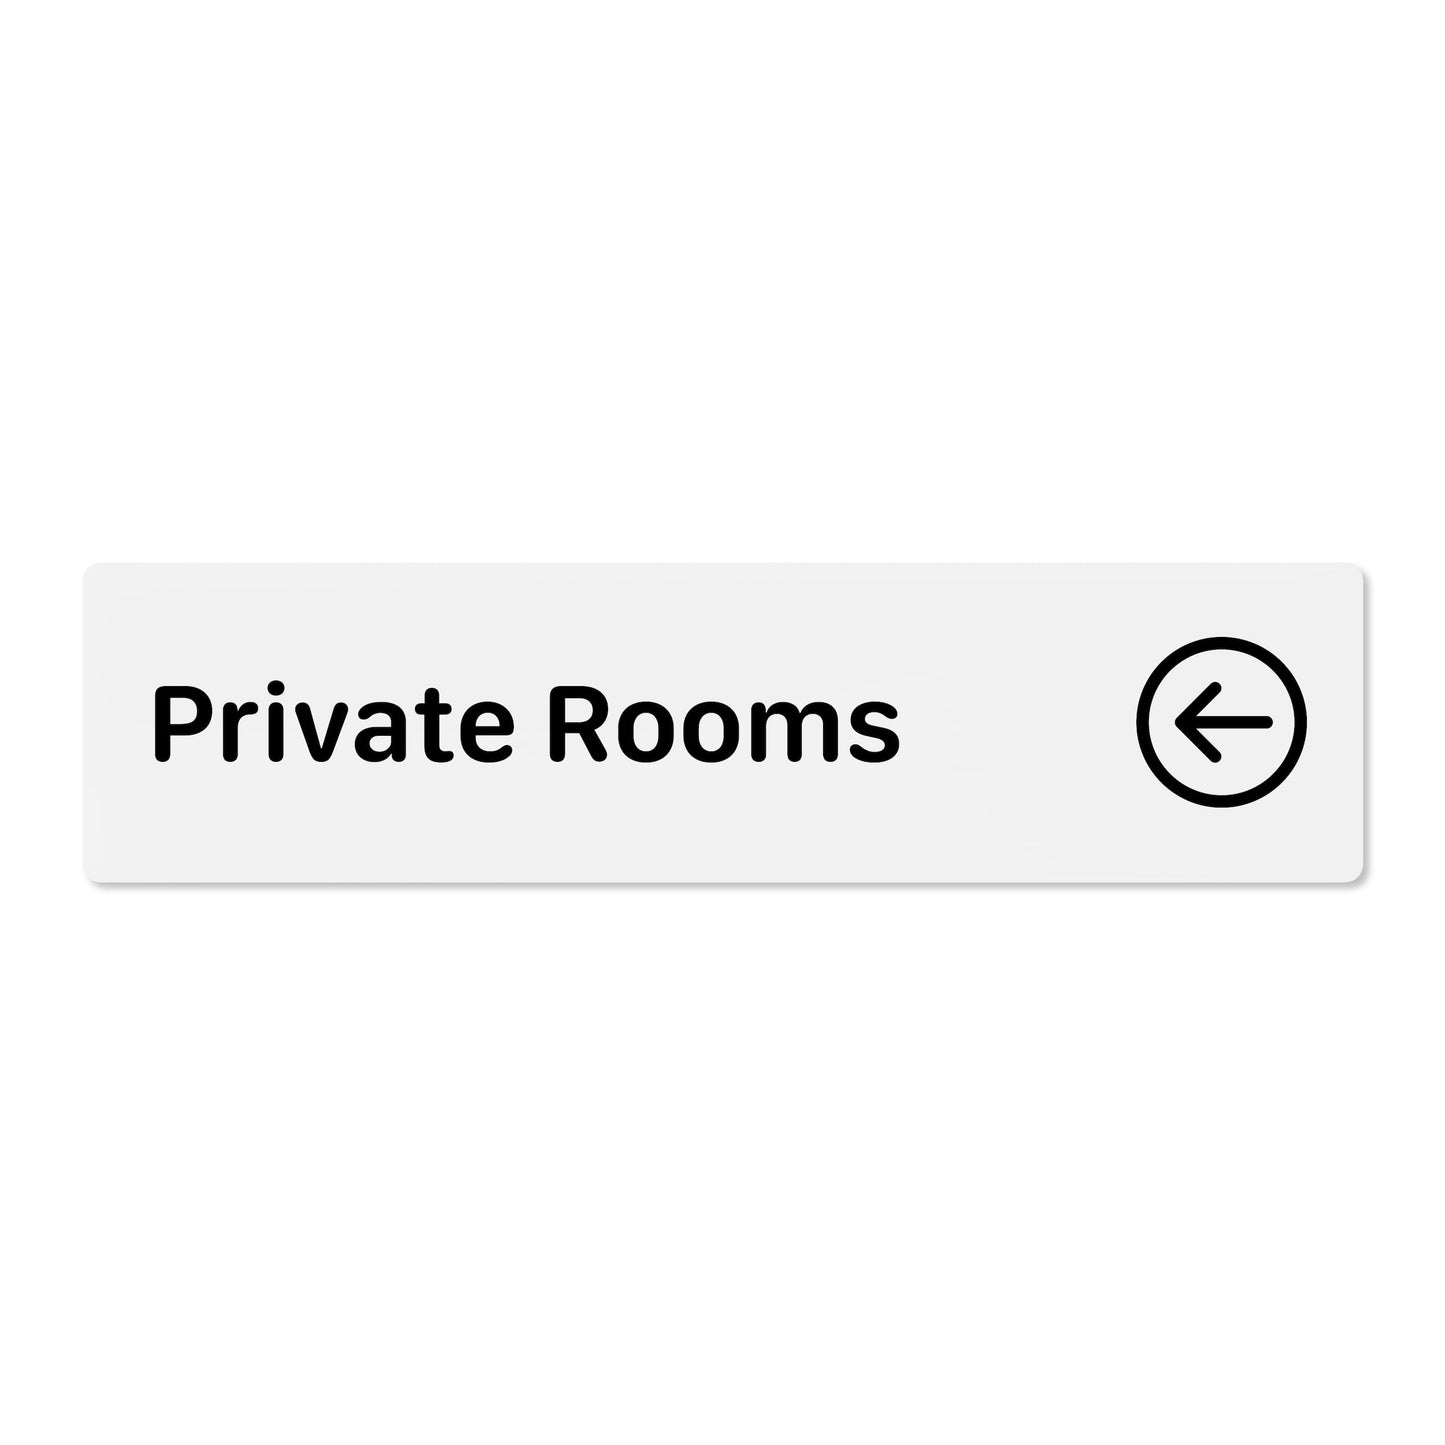 Private Rooms